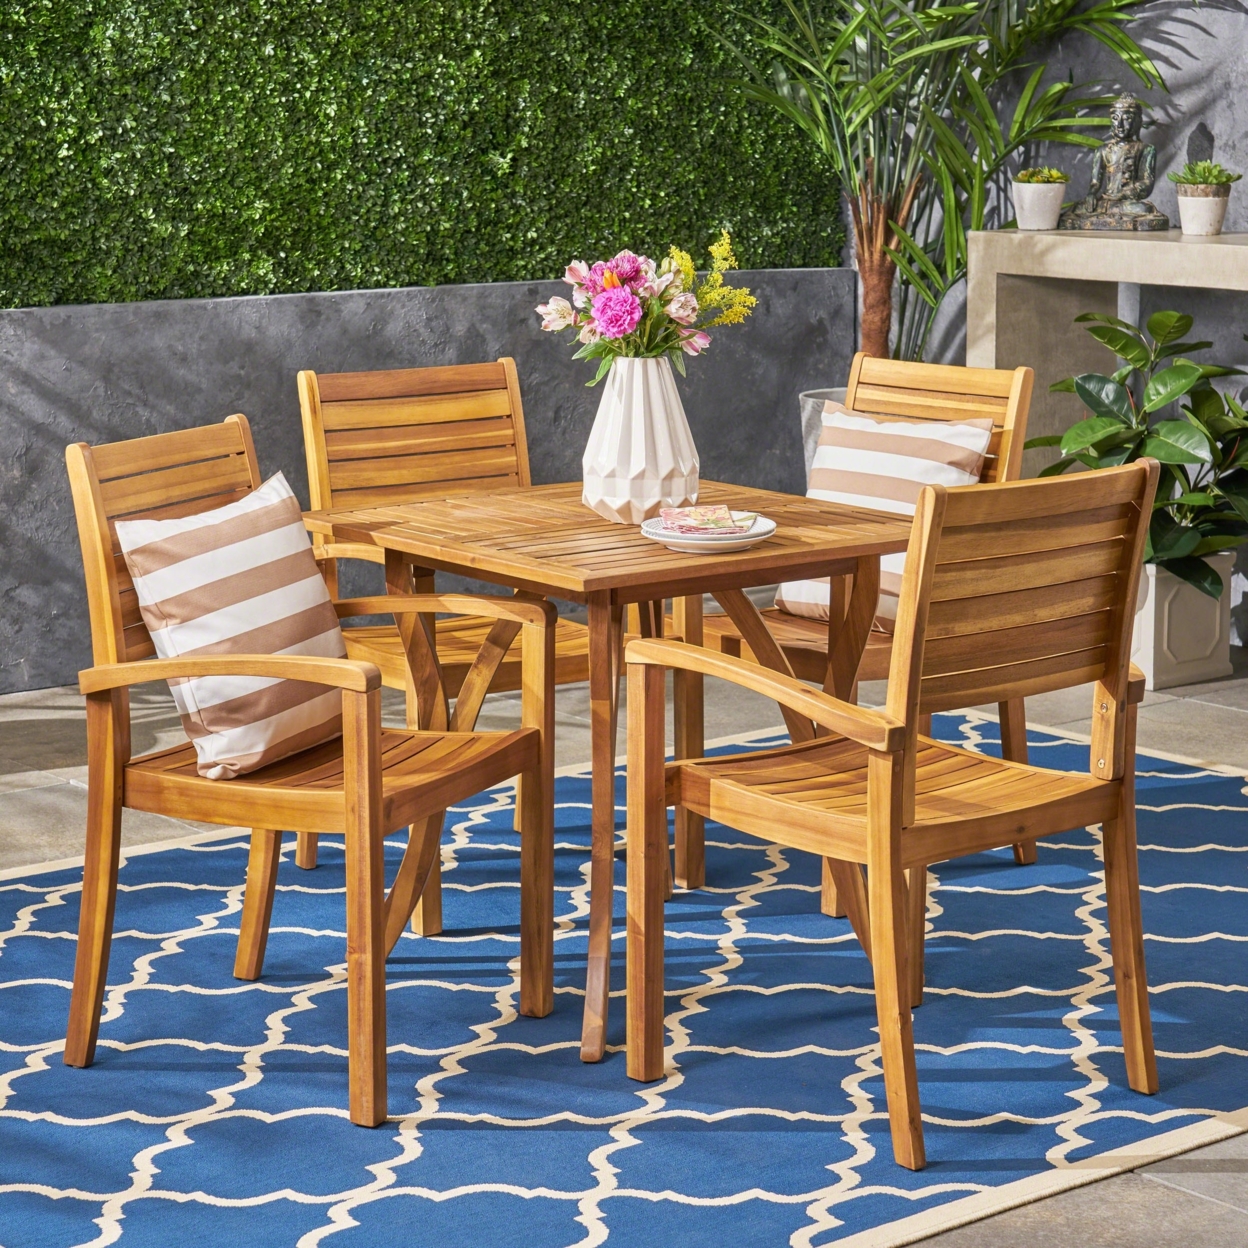 Carr Outdoor 4-Seater Square Acacia Wood Dining Set, Teak Finish